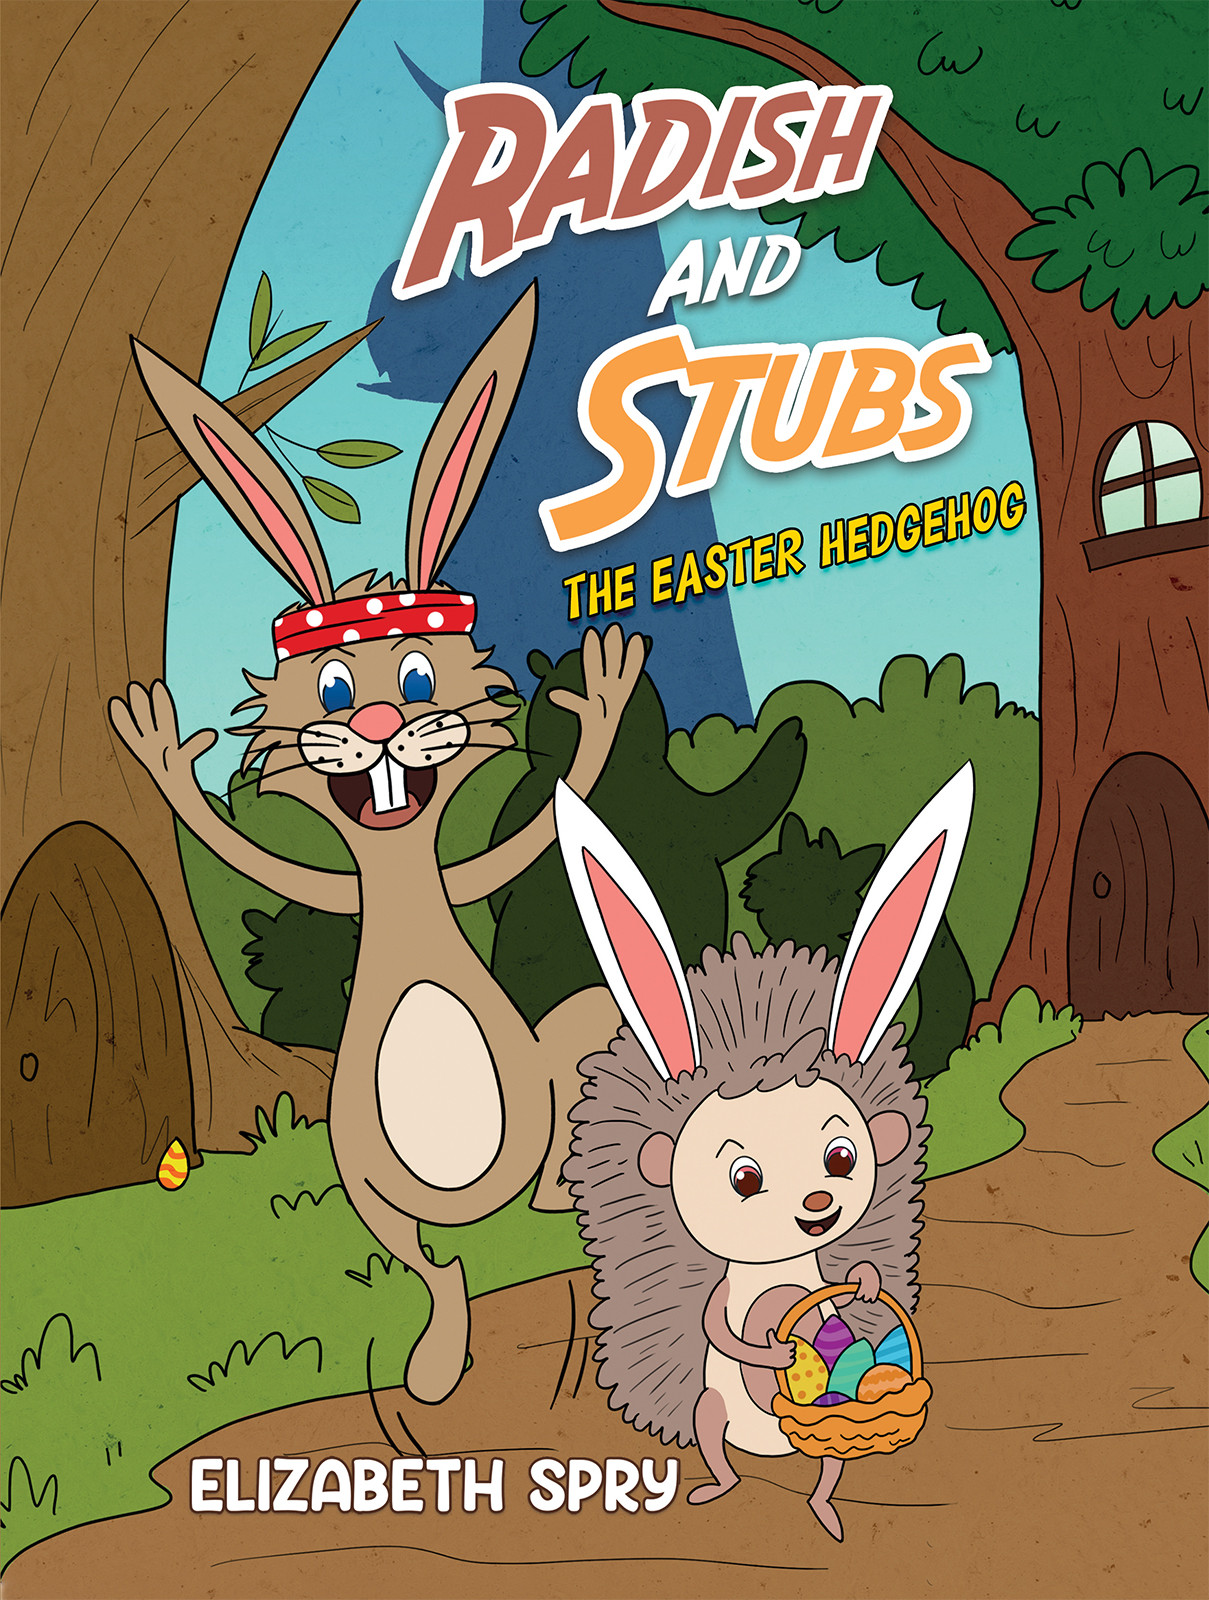 Radish and Stubs - The Easter Hedgehog-bookcover